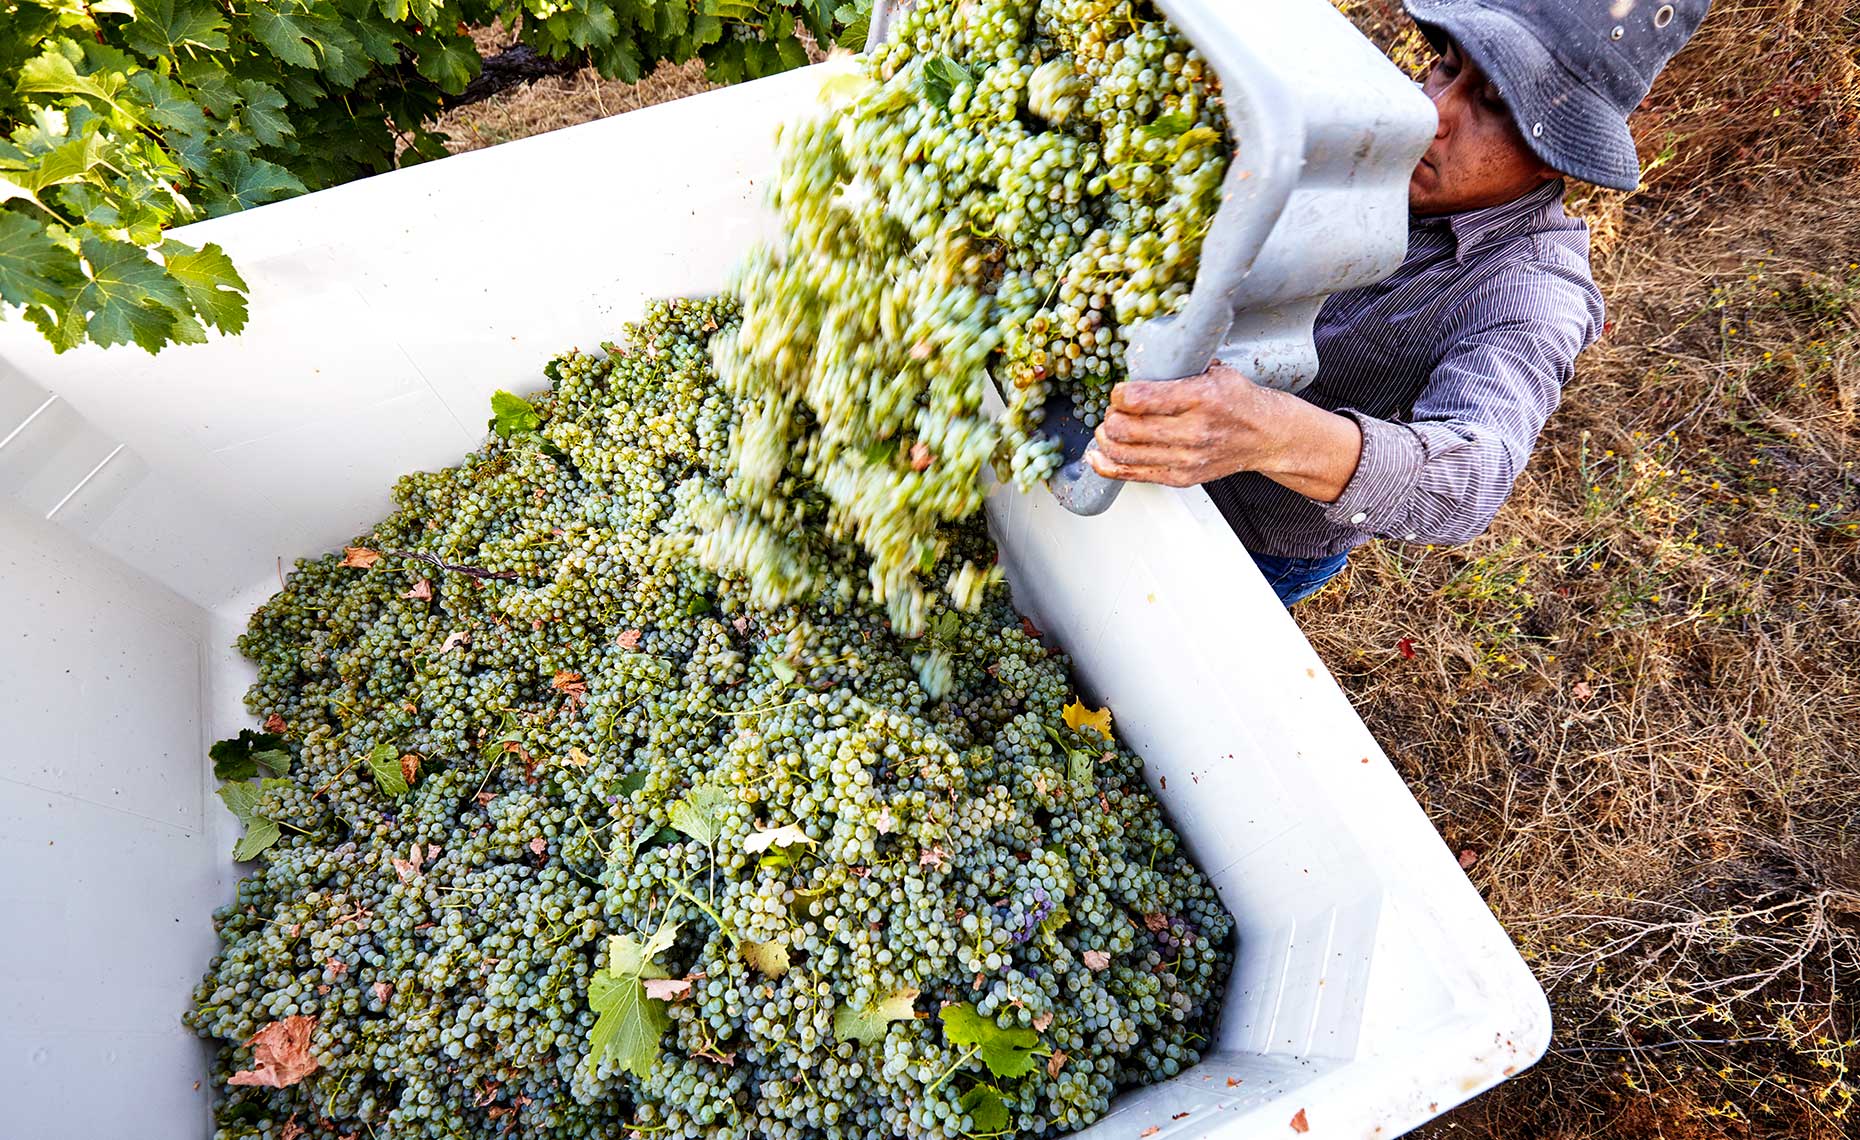 Filling bin with harvested grapes